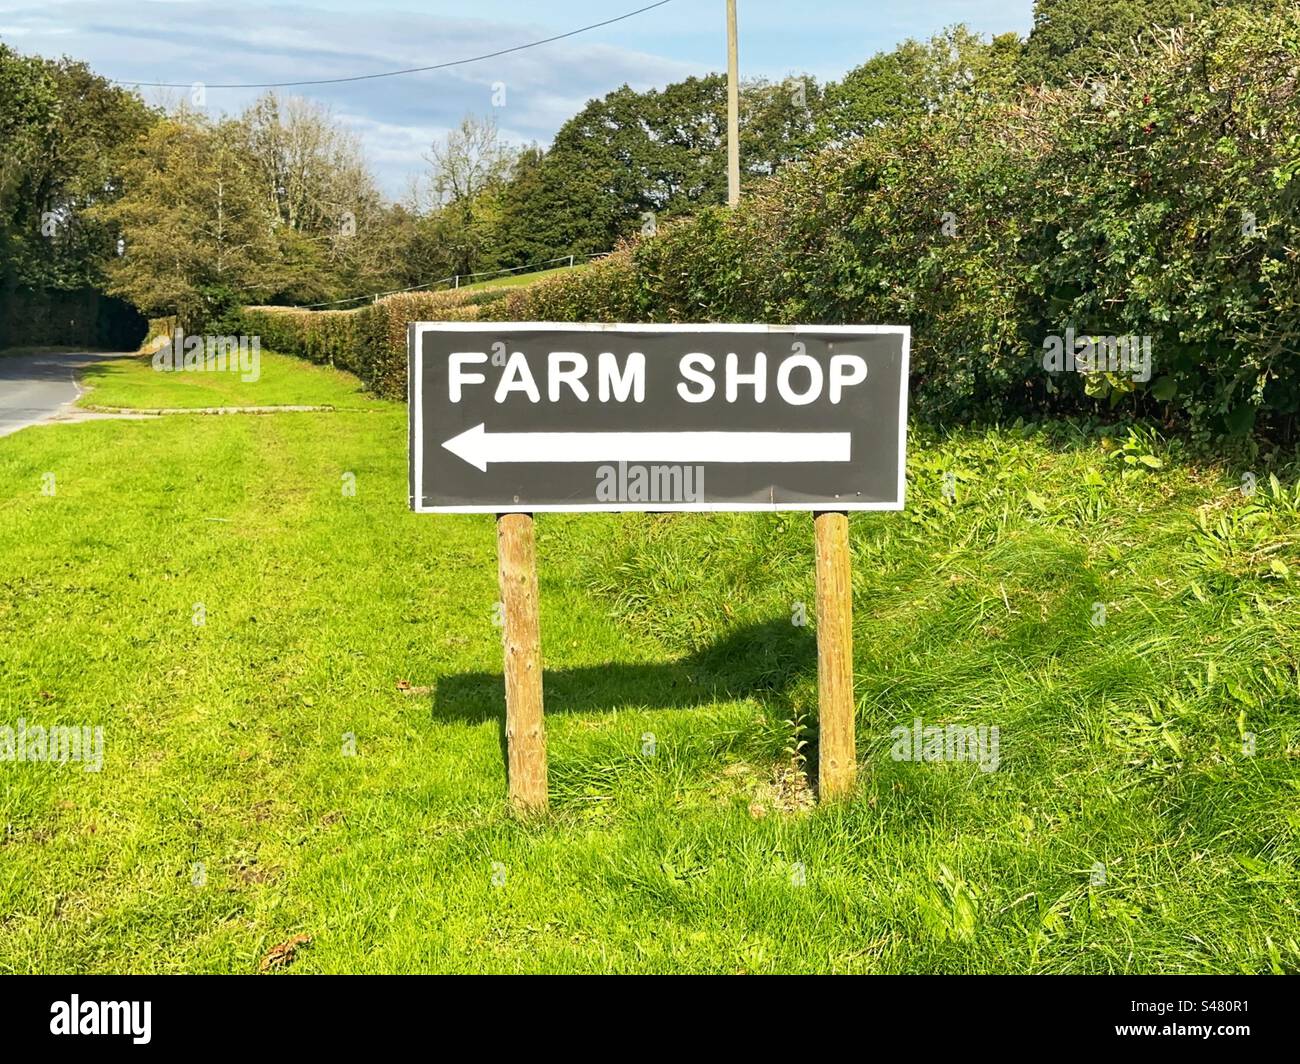 Sign for a Farm Shop on the grass verge of a country road. No people. Stock Photo